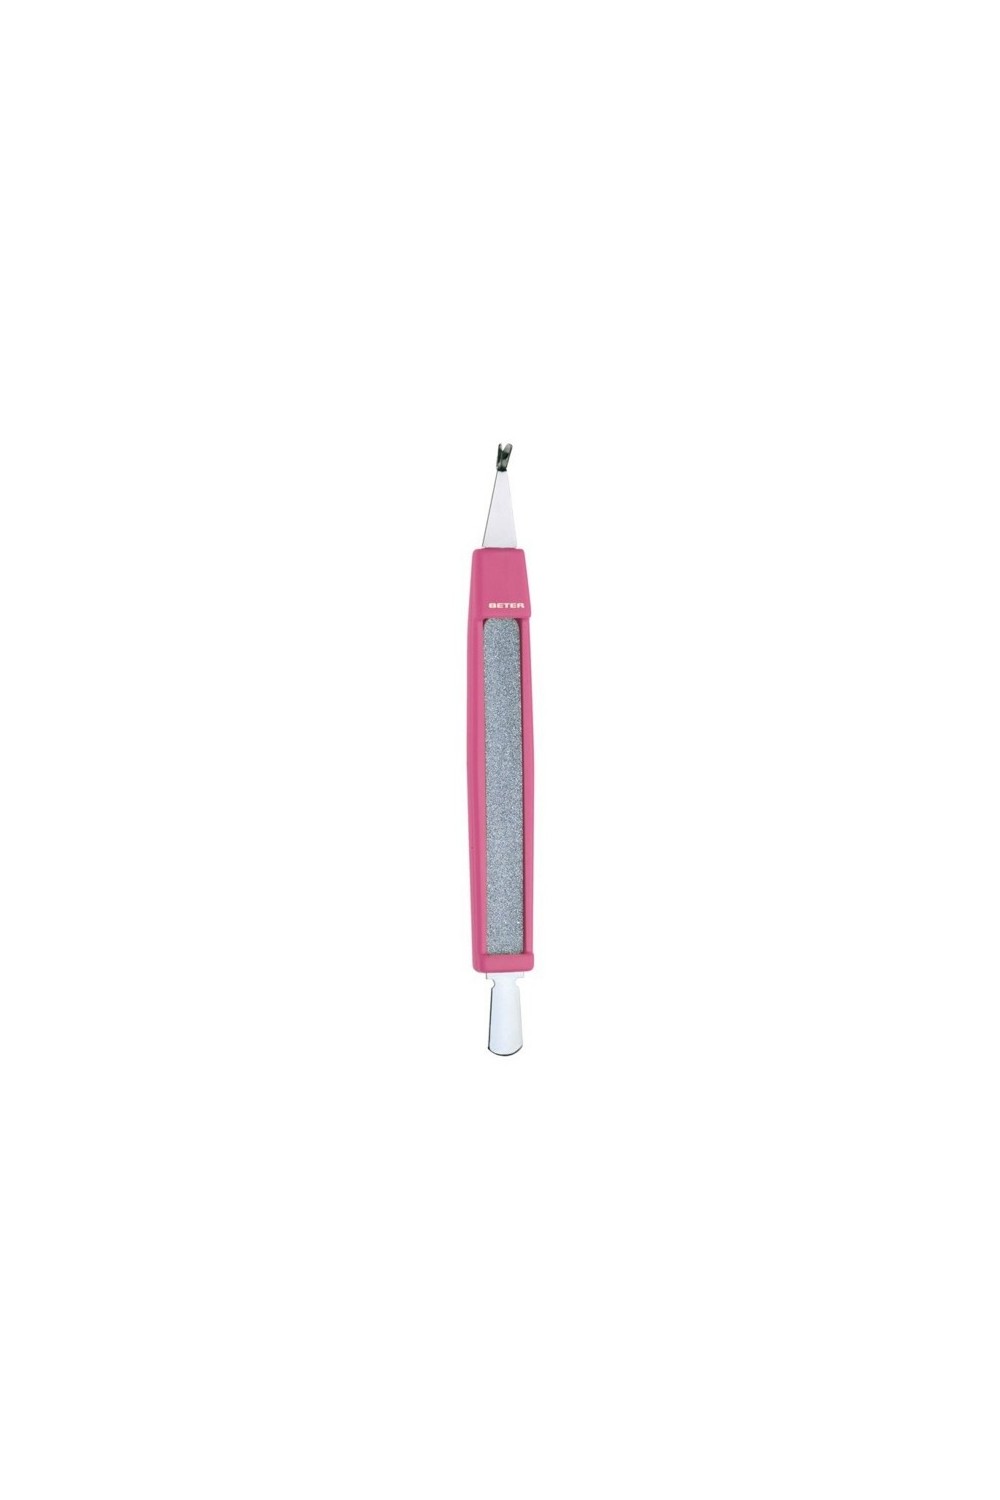 Beter Cuticle Cutter With Cuticle Pusher And File